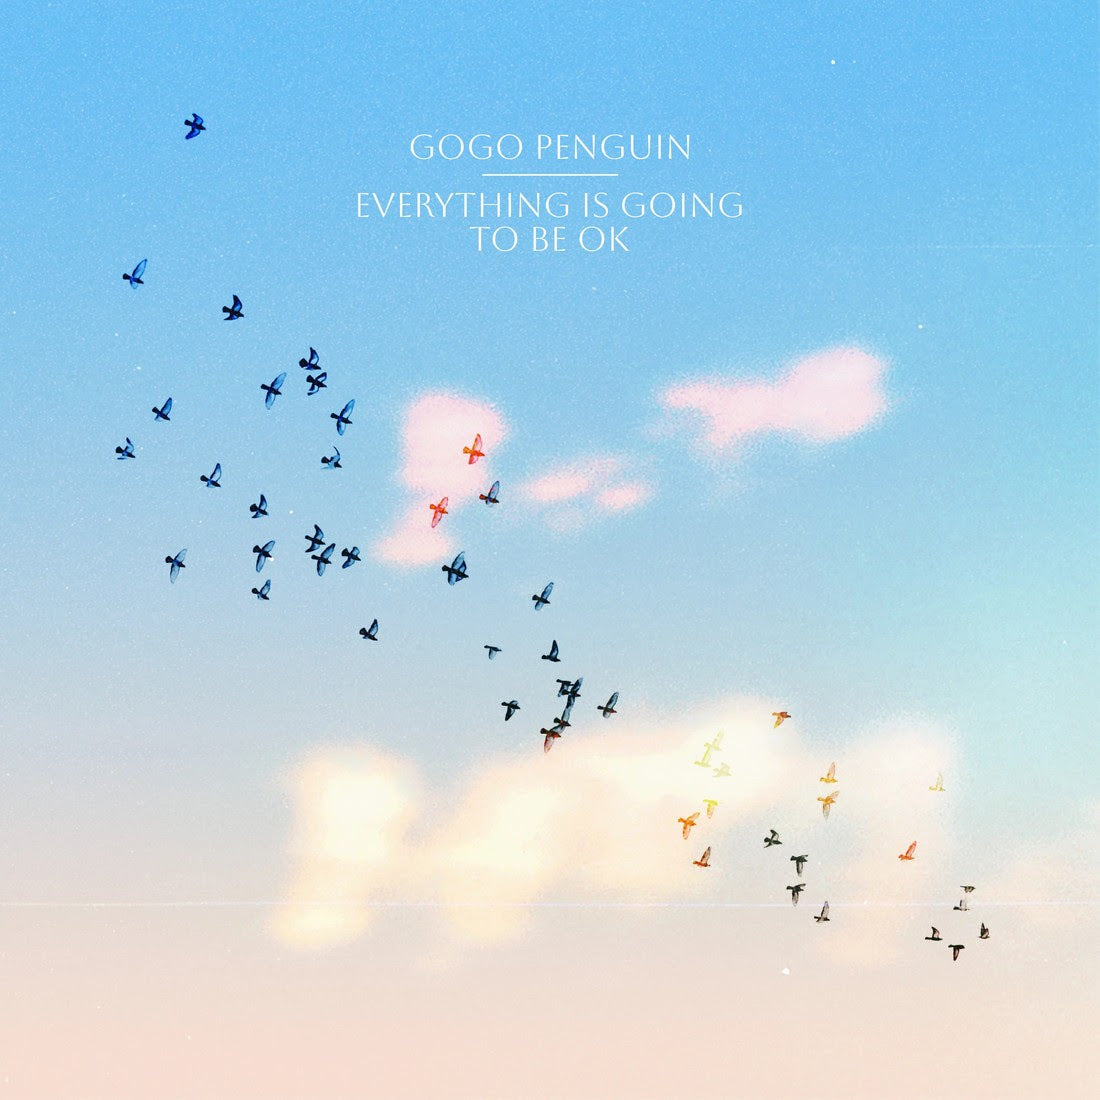 GoGo Penguin - EVERYTHING IS GOING TO BE OK LP